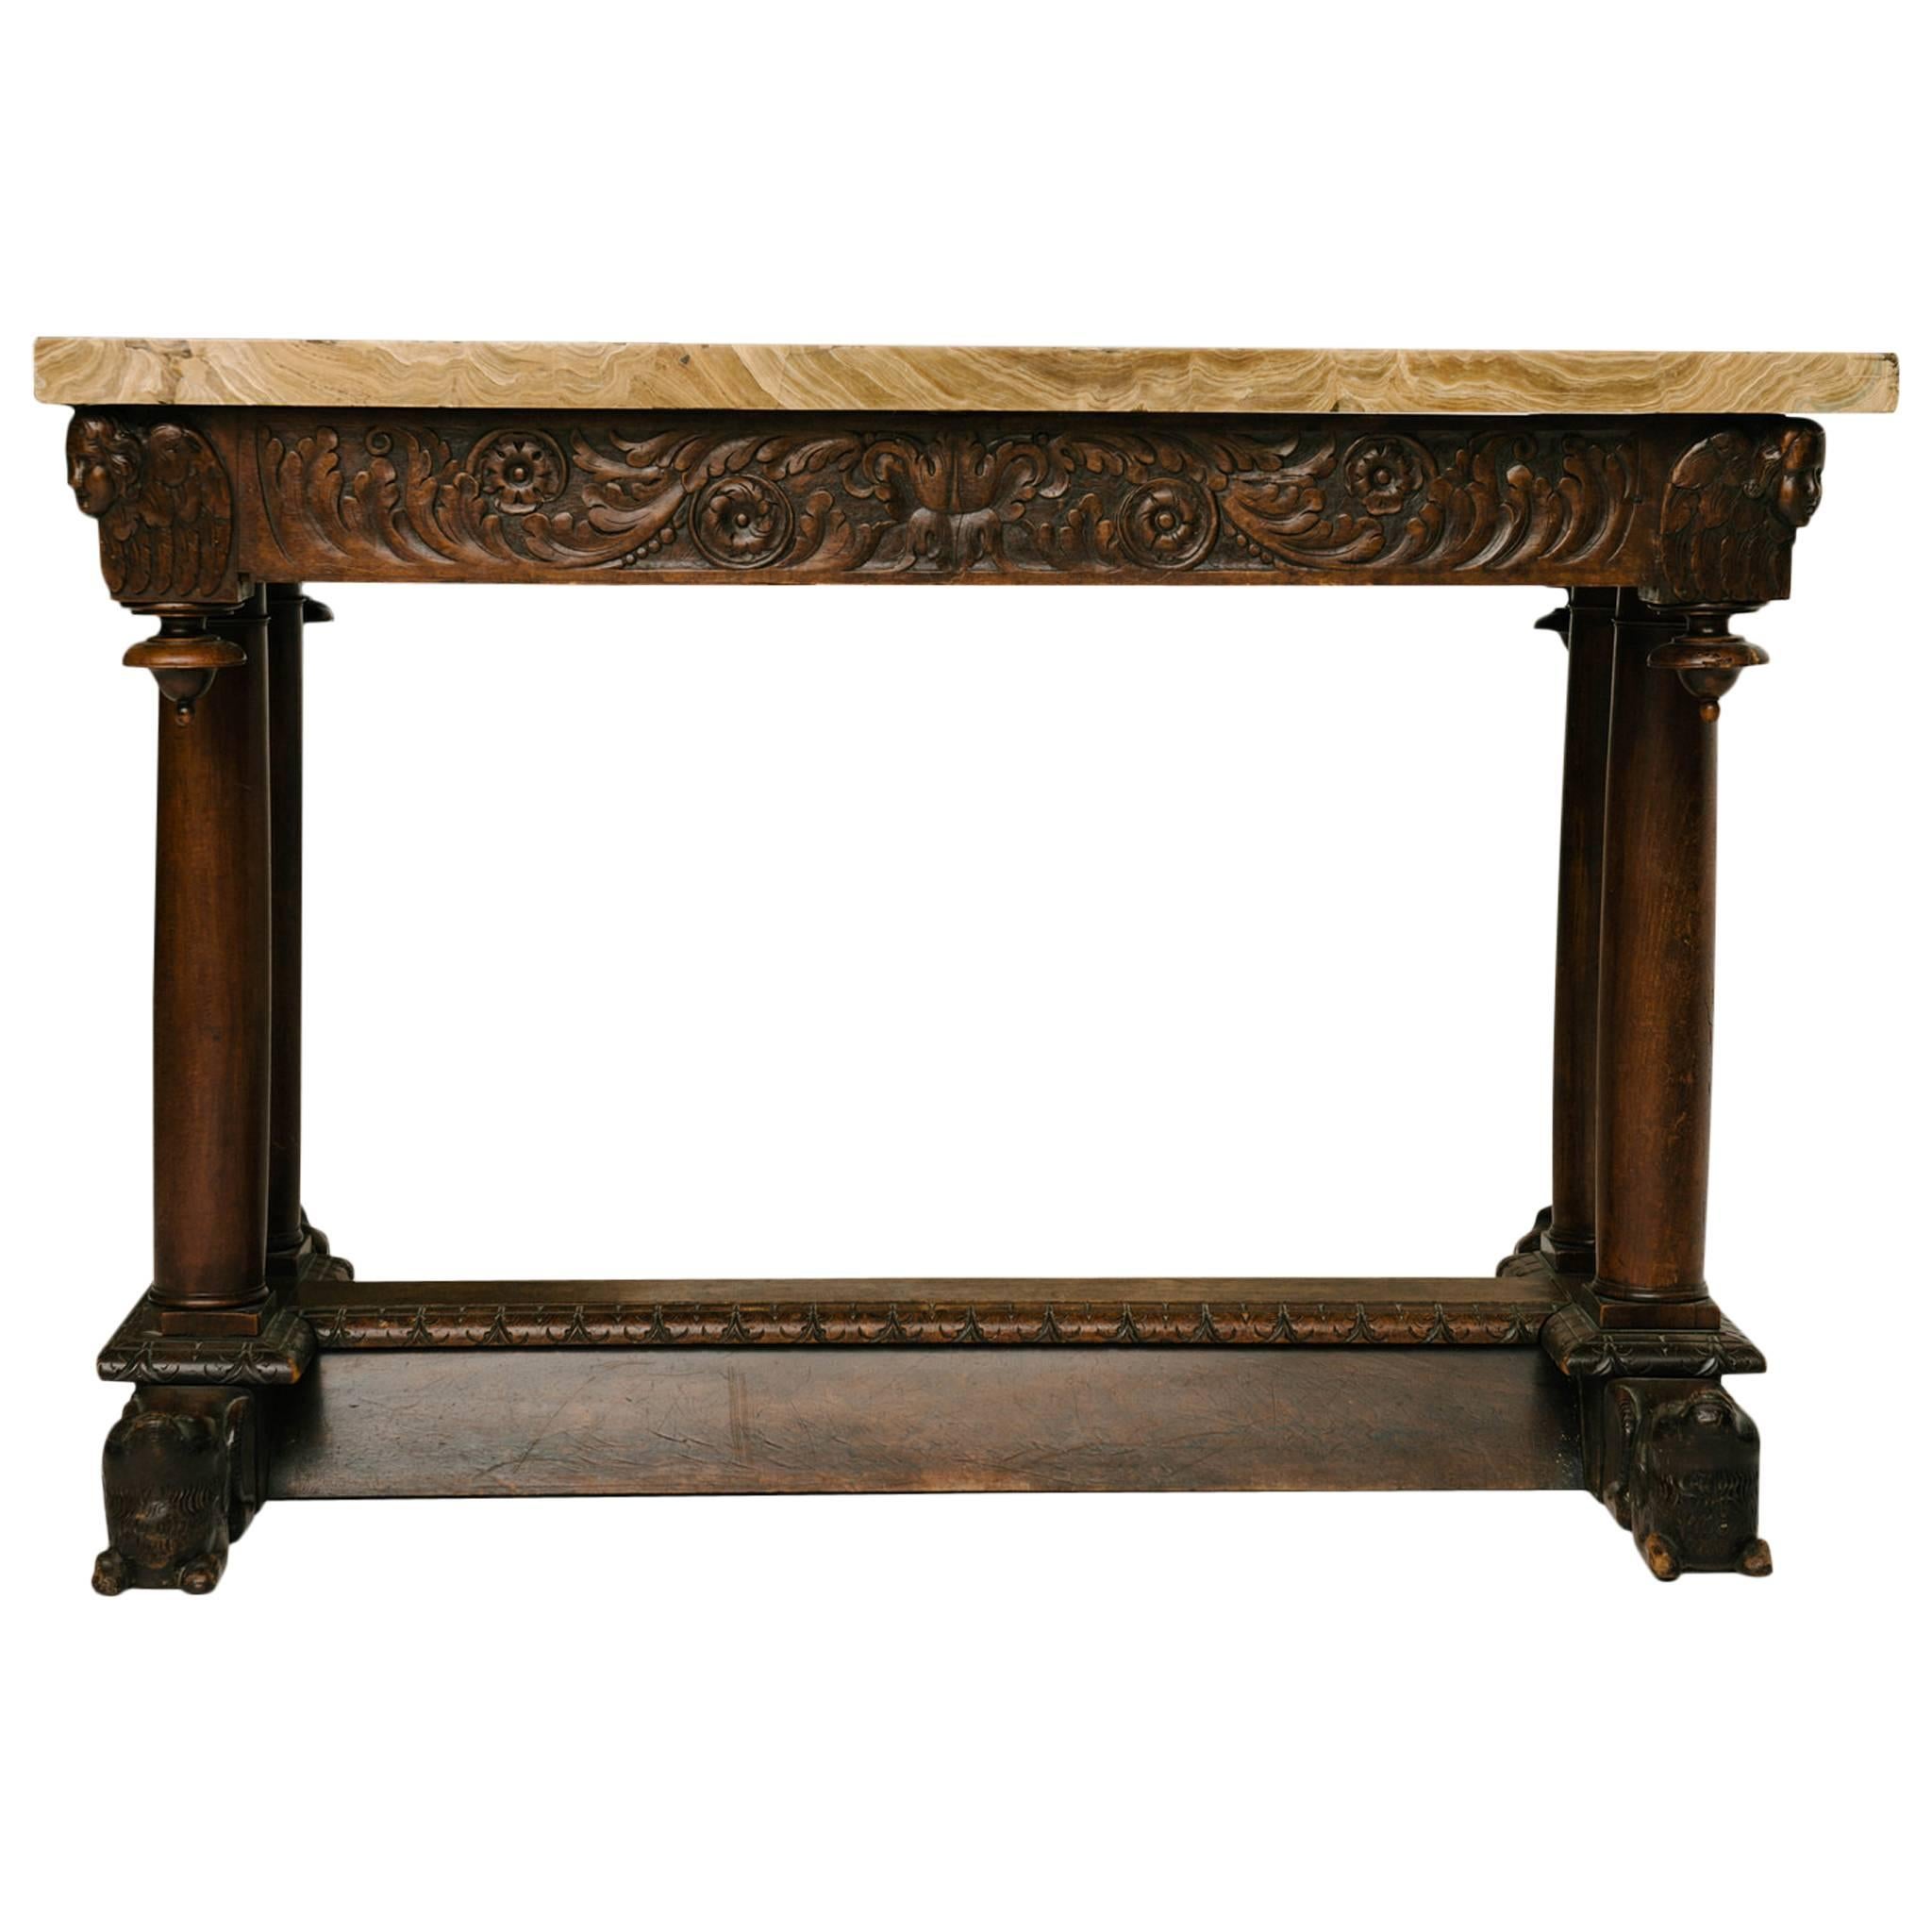 17th century carved walnut console or center table with onyx top.